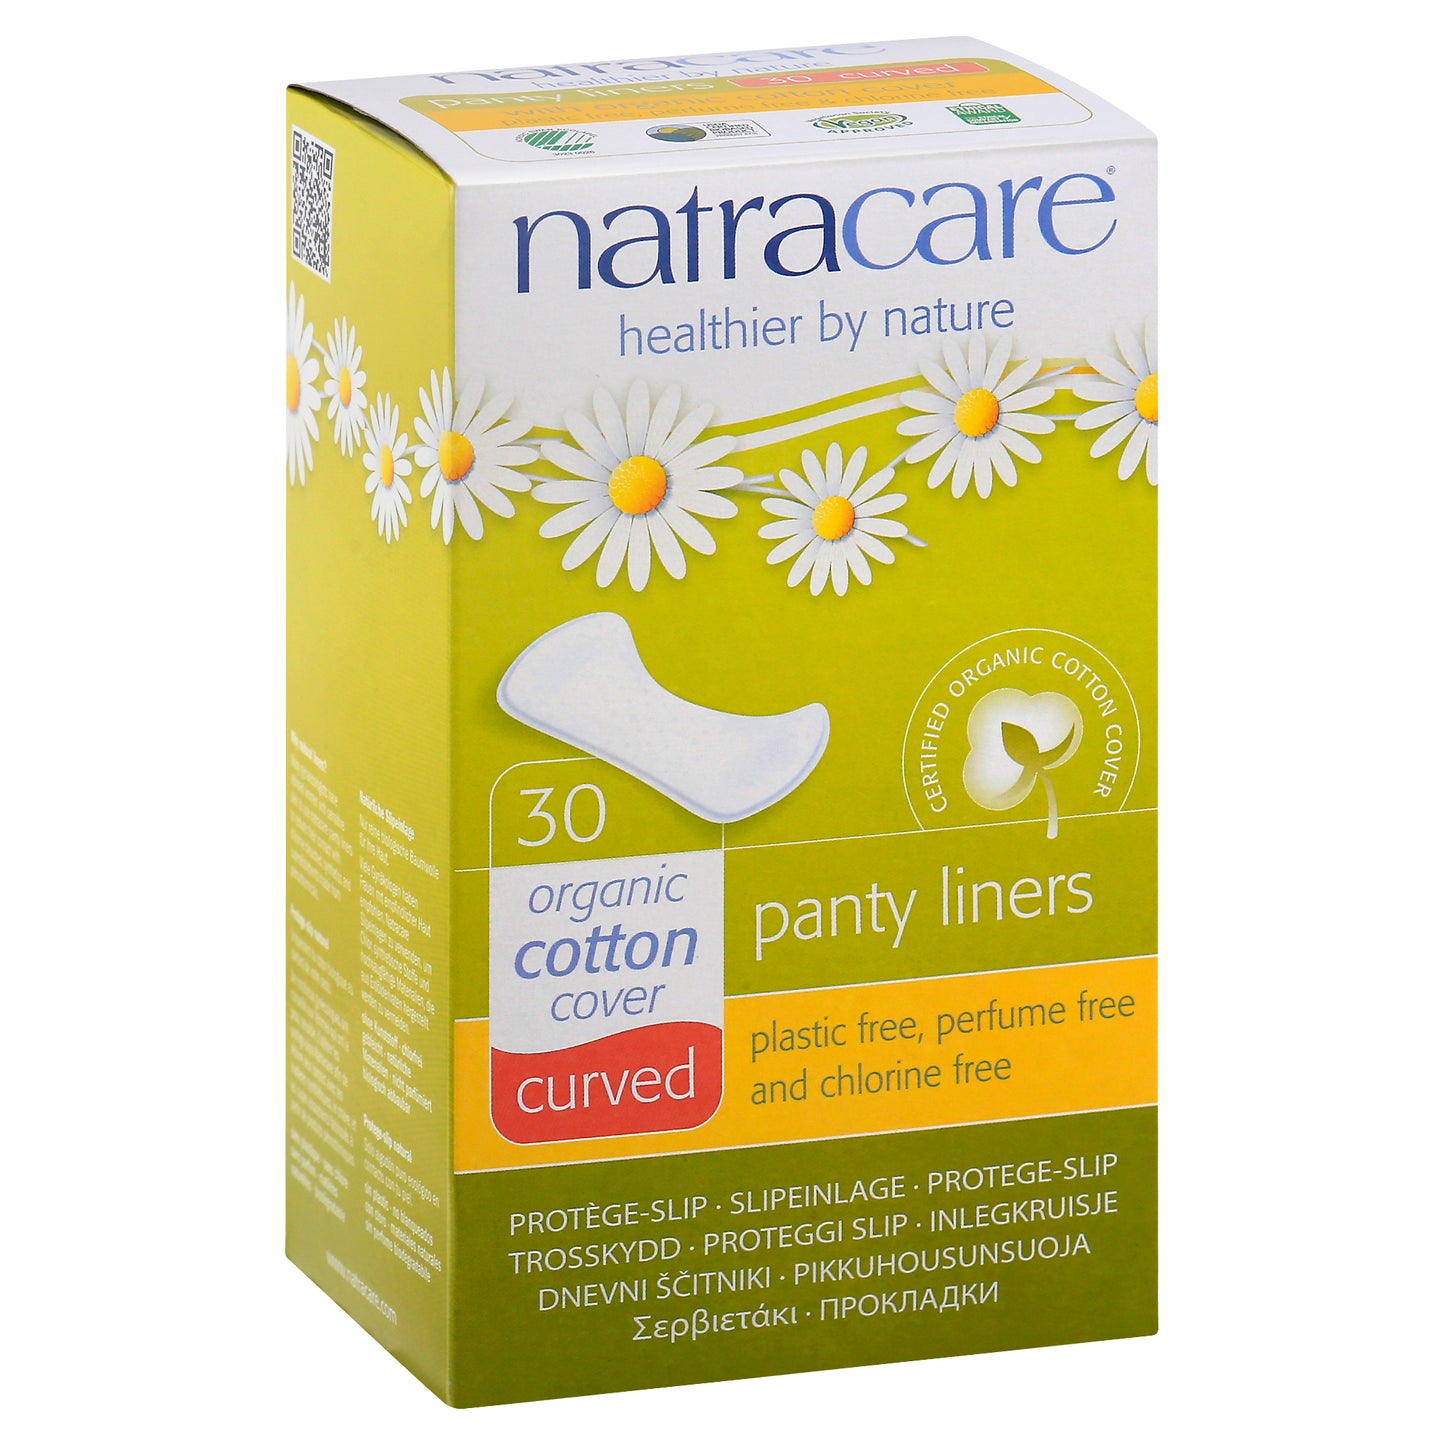 Natracare Panty Liner Curved 30 Pieces (Pack Of 4)